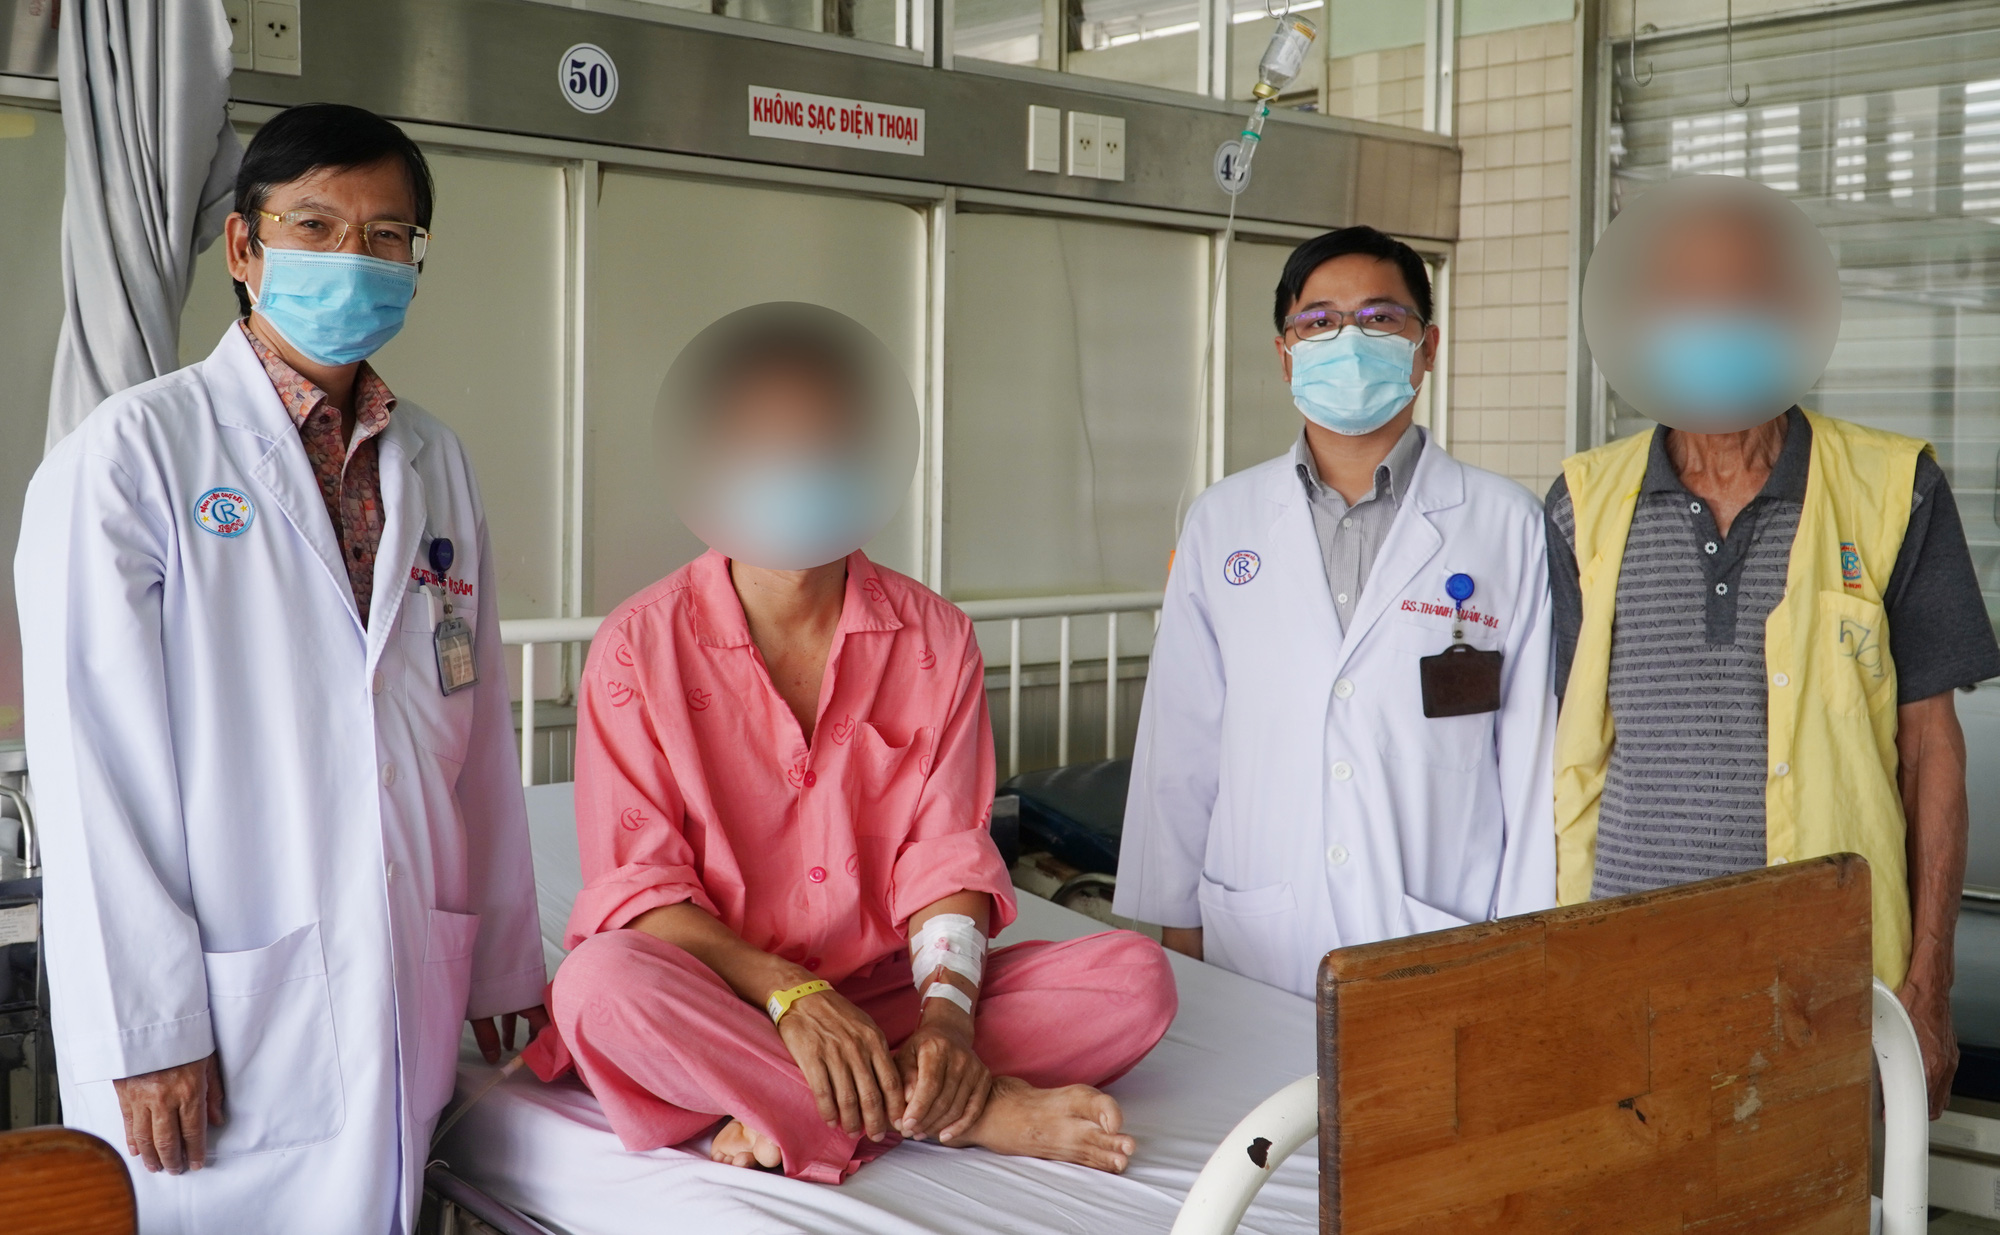 In Vietnam, woman rushes husband to hospital after cutting off his penis